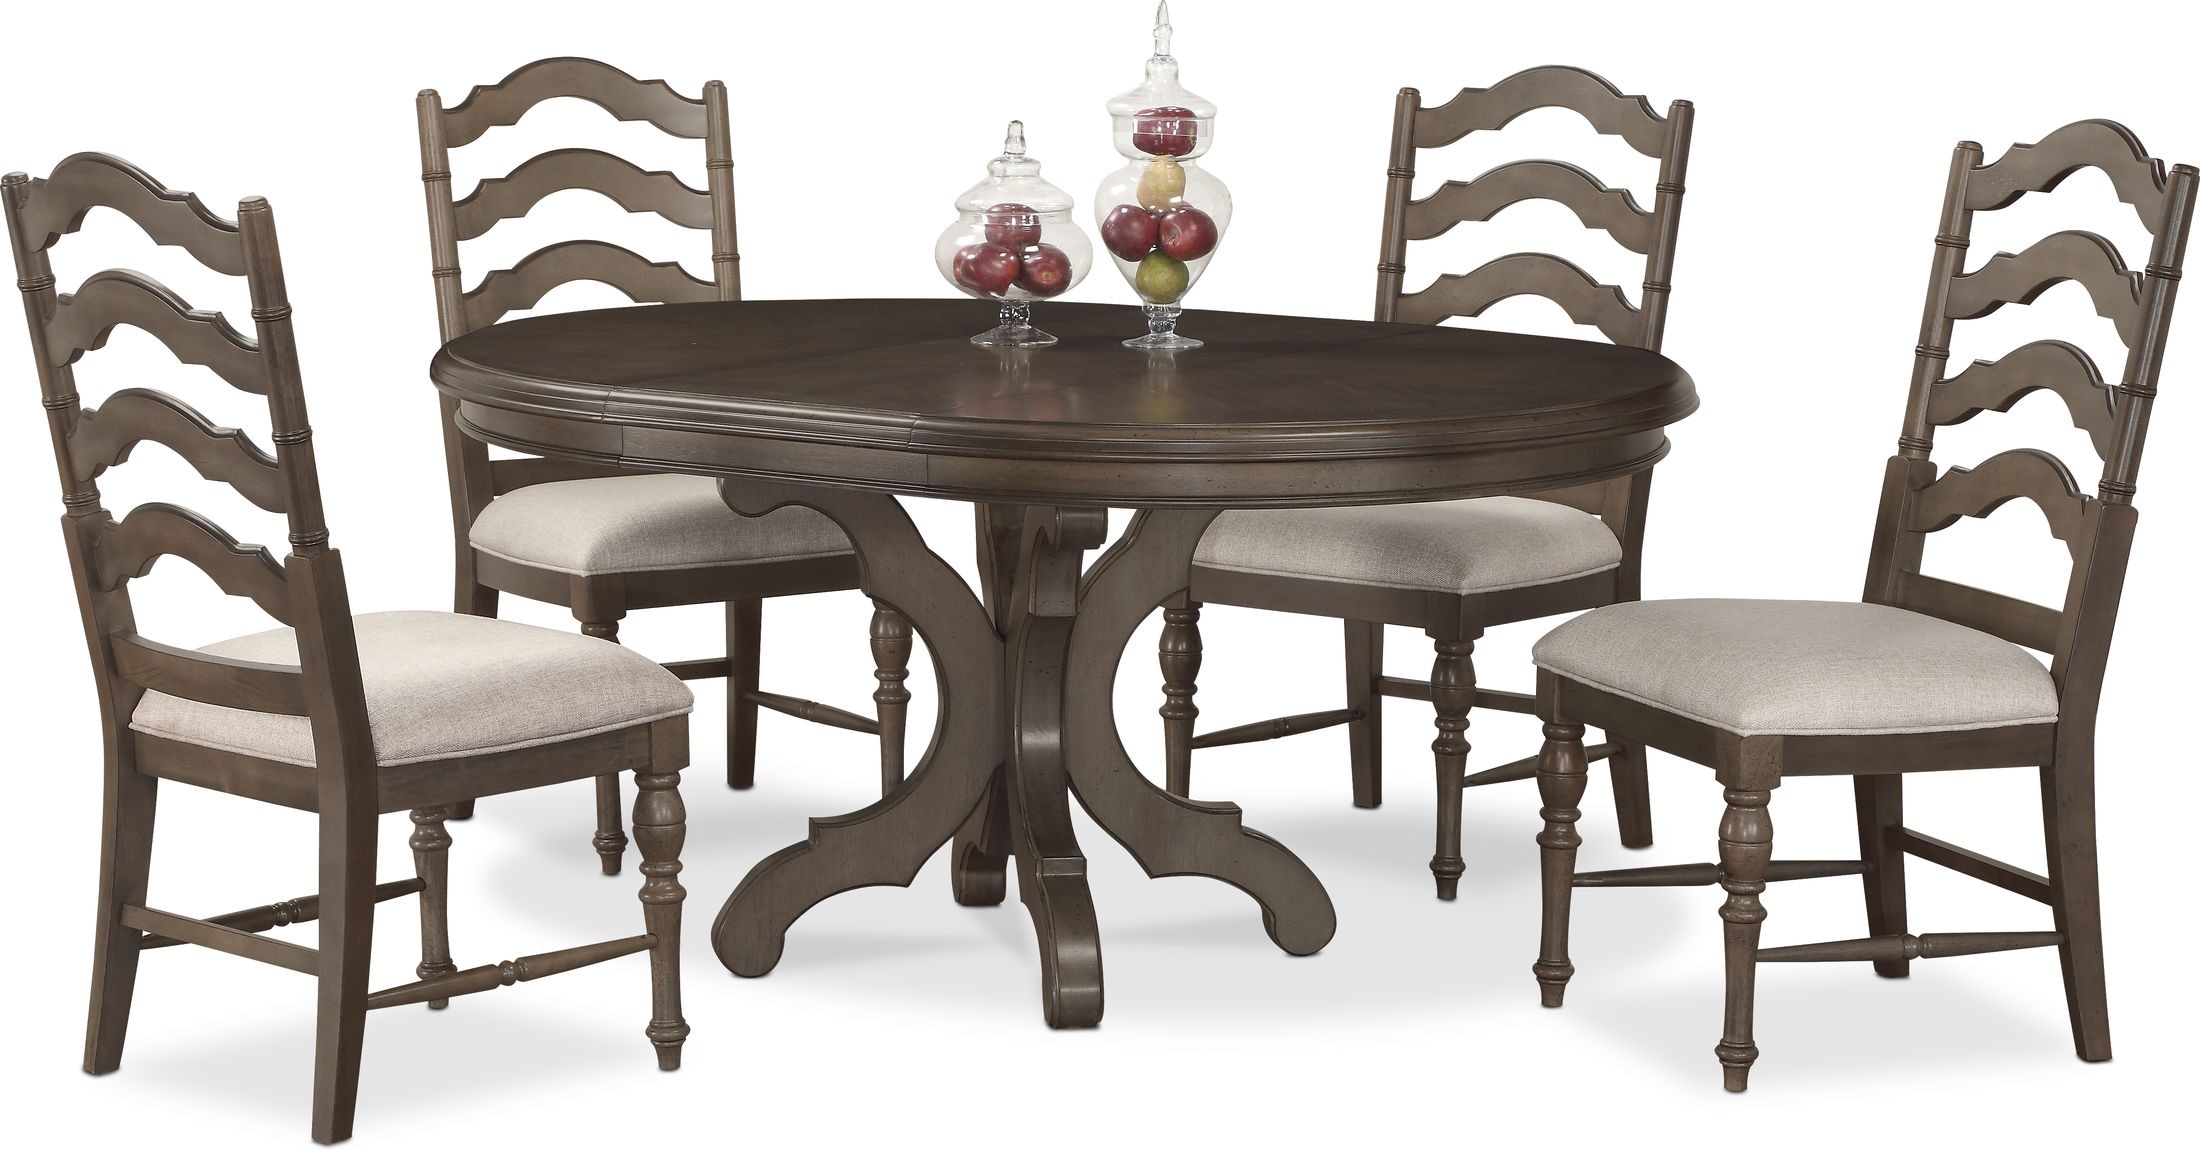 Value City Dining Room Furniture - Chesapeake Ii Dining Room Collection